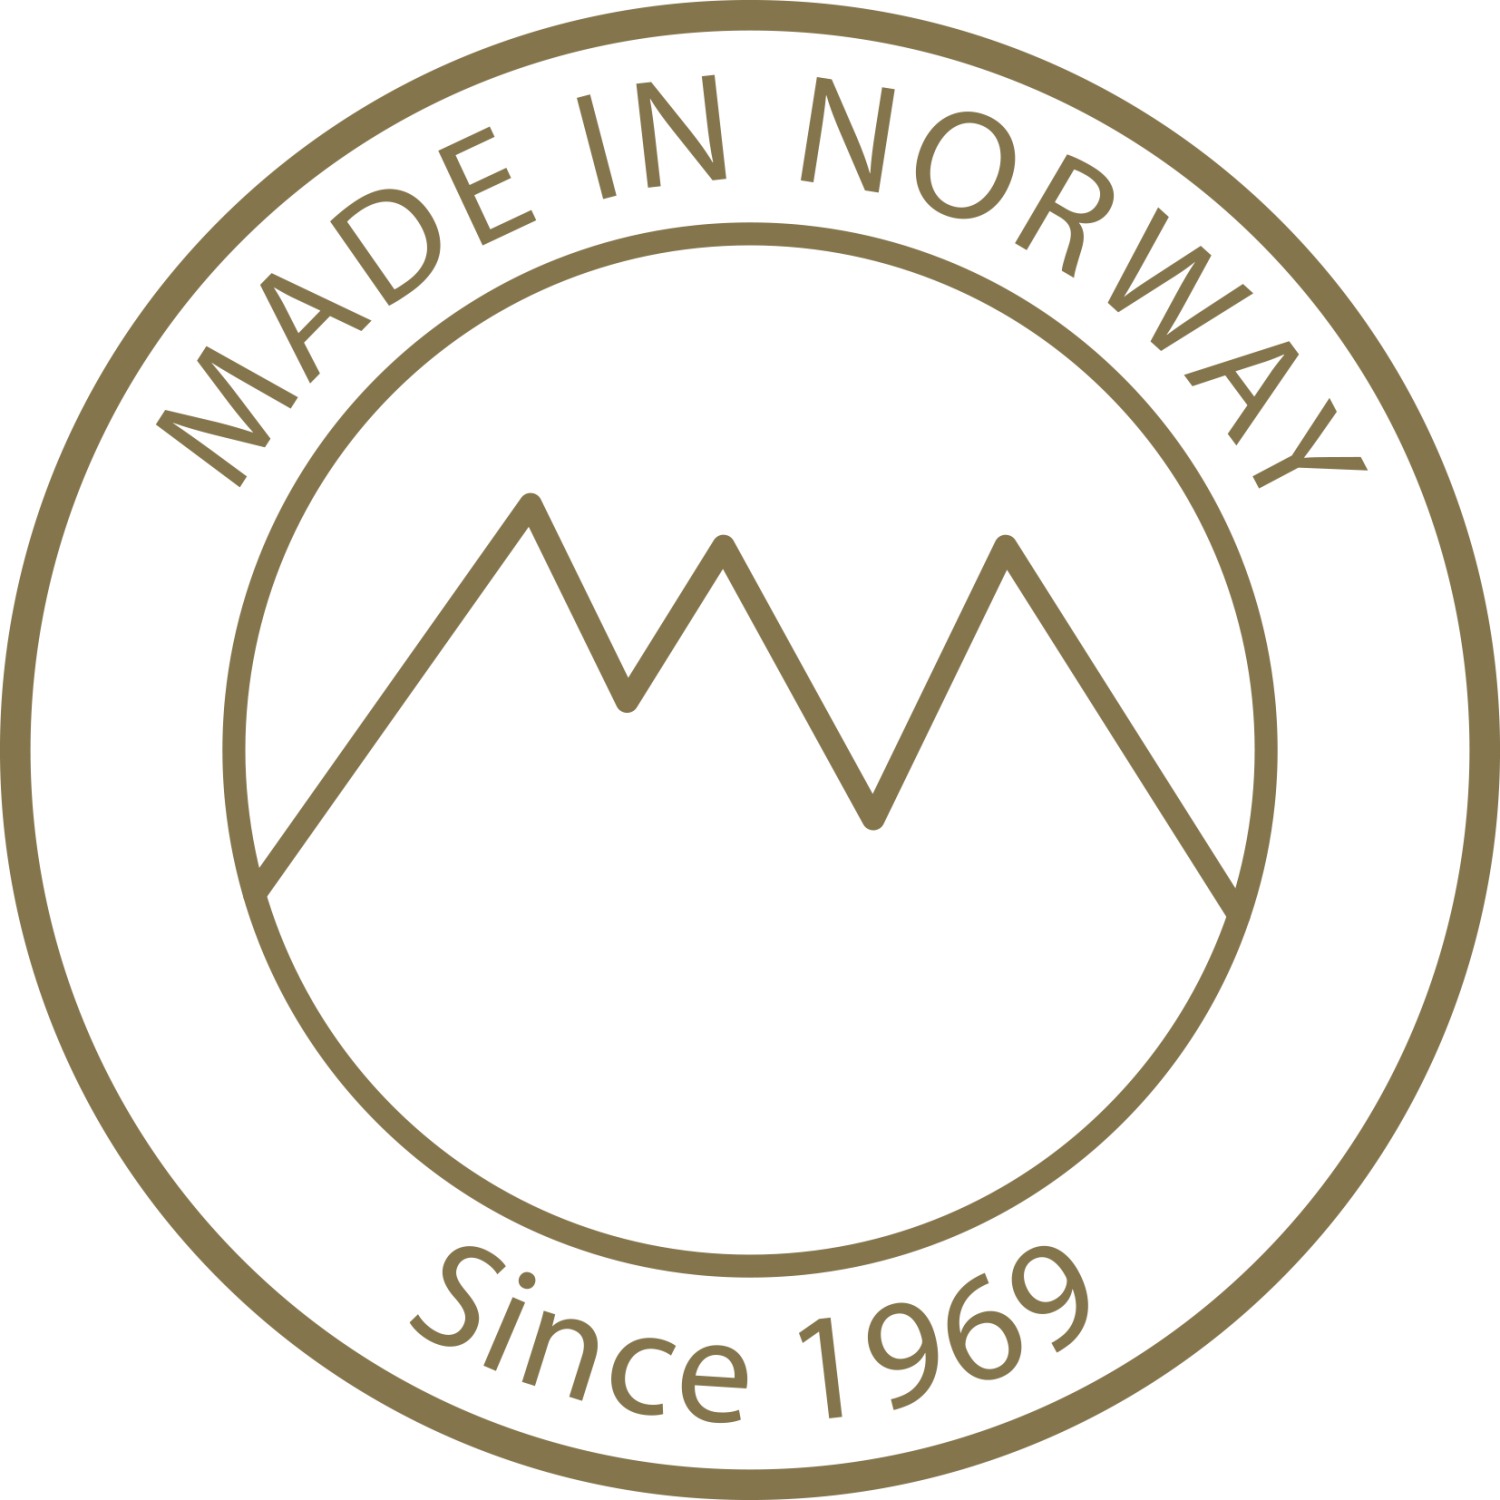 Foto: Made in Norway